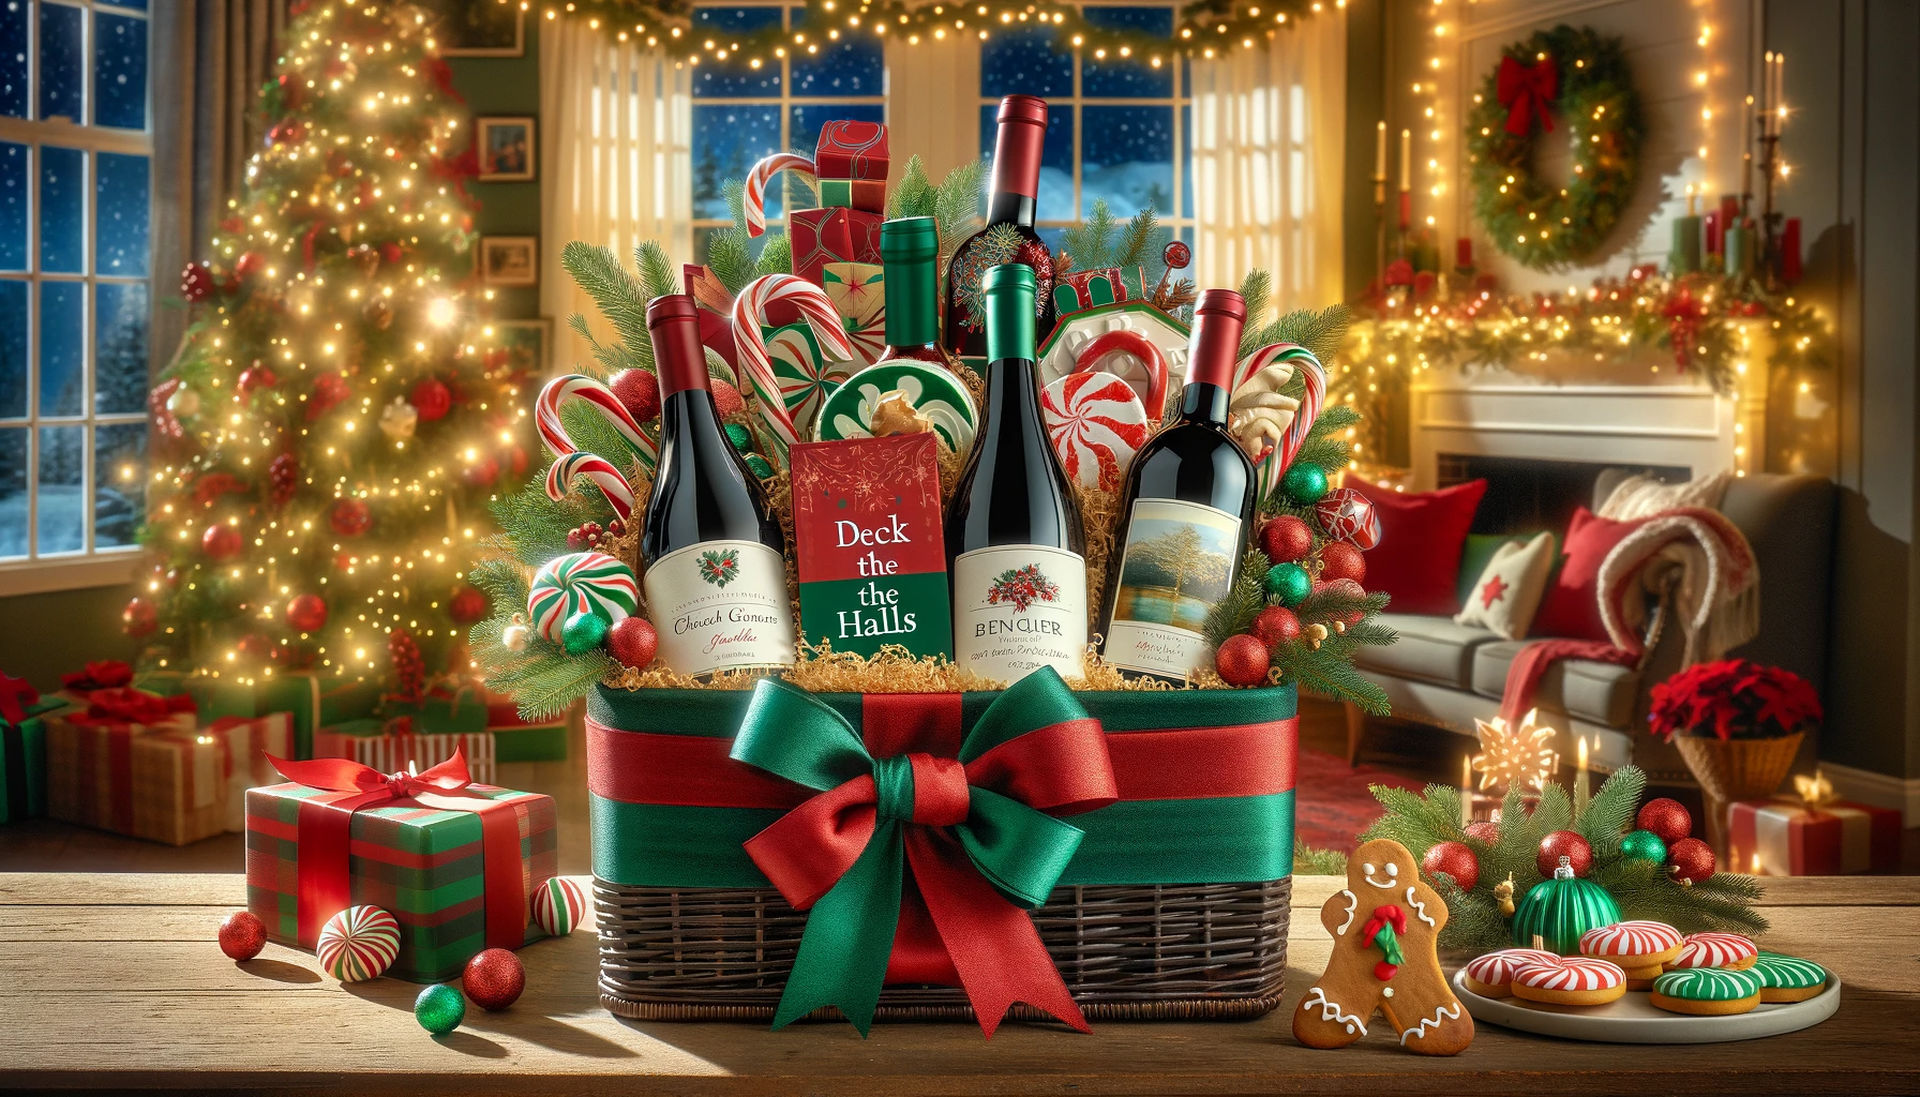 wine gift basket - A festive scene depicting a holiday-themed wine gift basket for 'Deck the Halls'. The basket includes a selection of red and green wines, creatively r